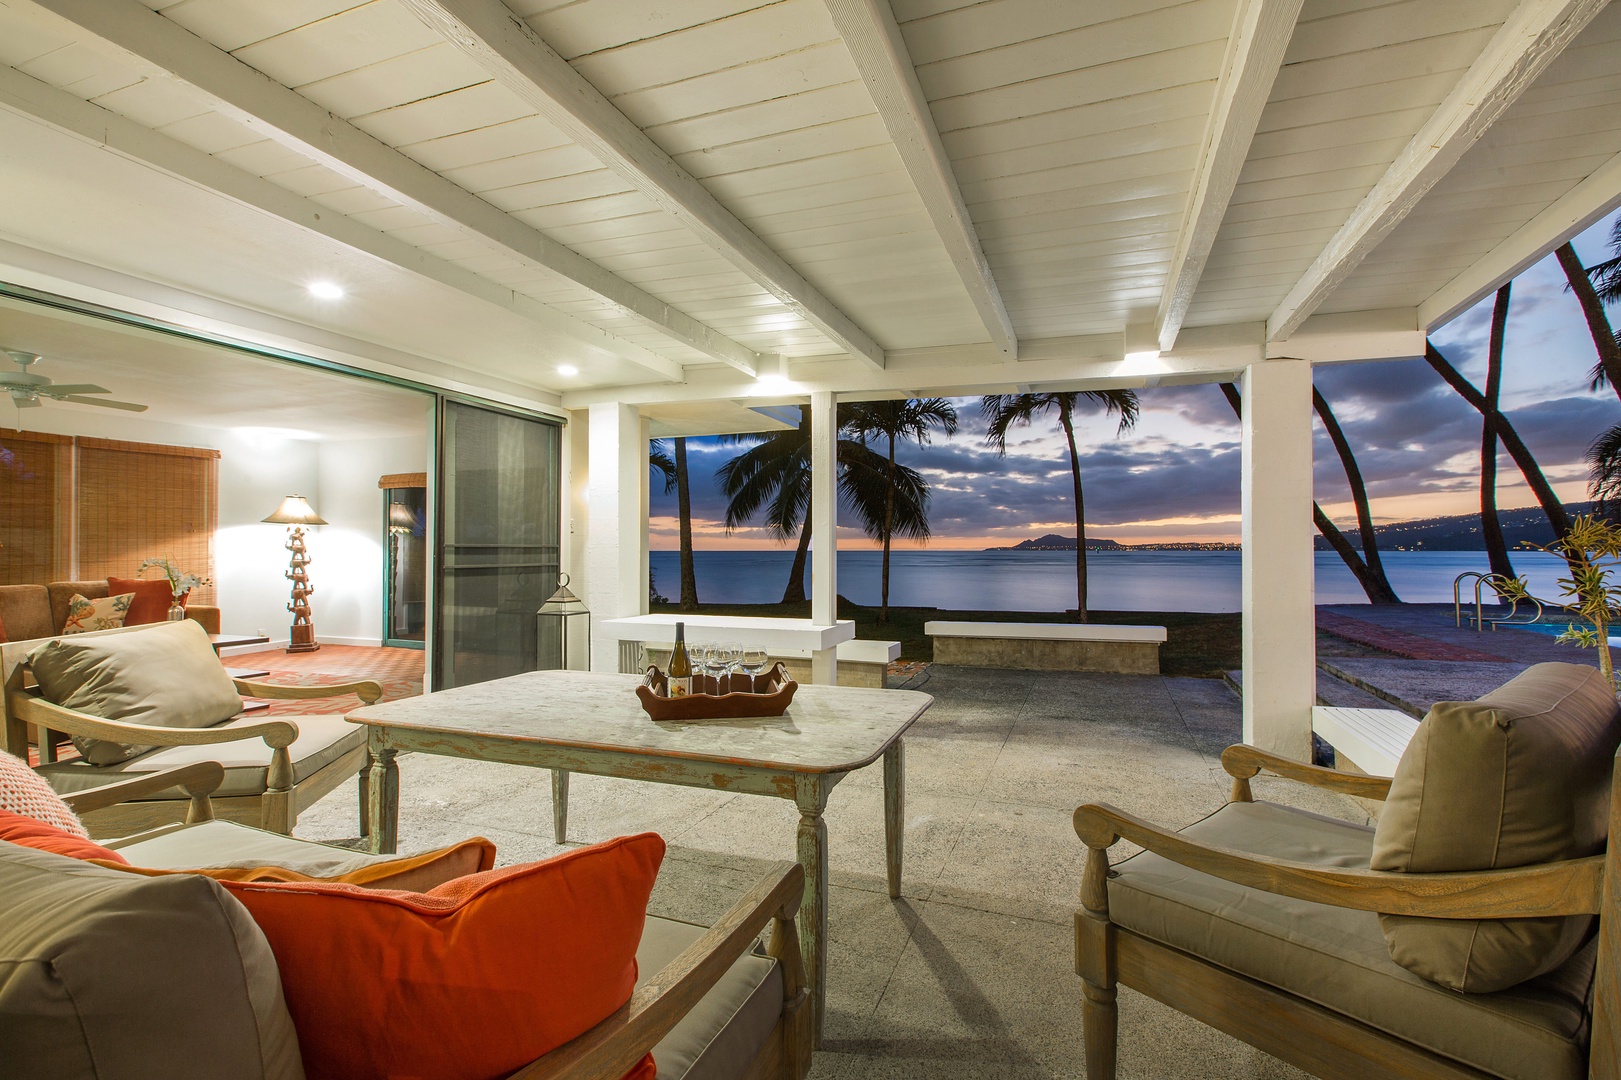 Honolulu Vacation Rentals, Hale Kai - Take in the sunset views from the covered lanai!